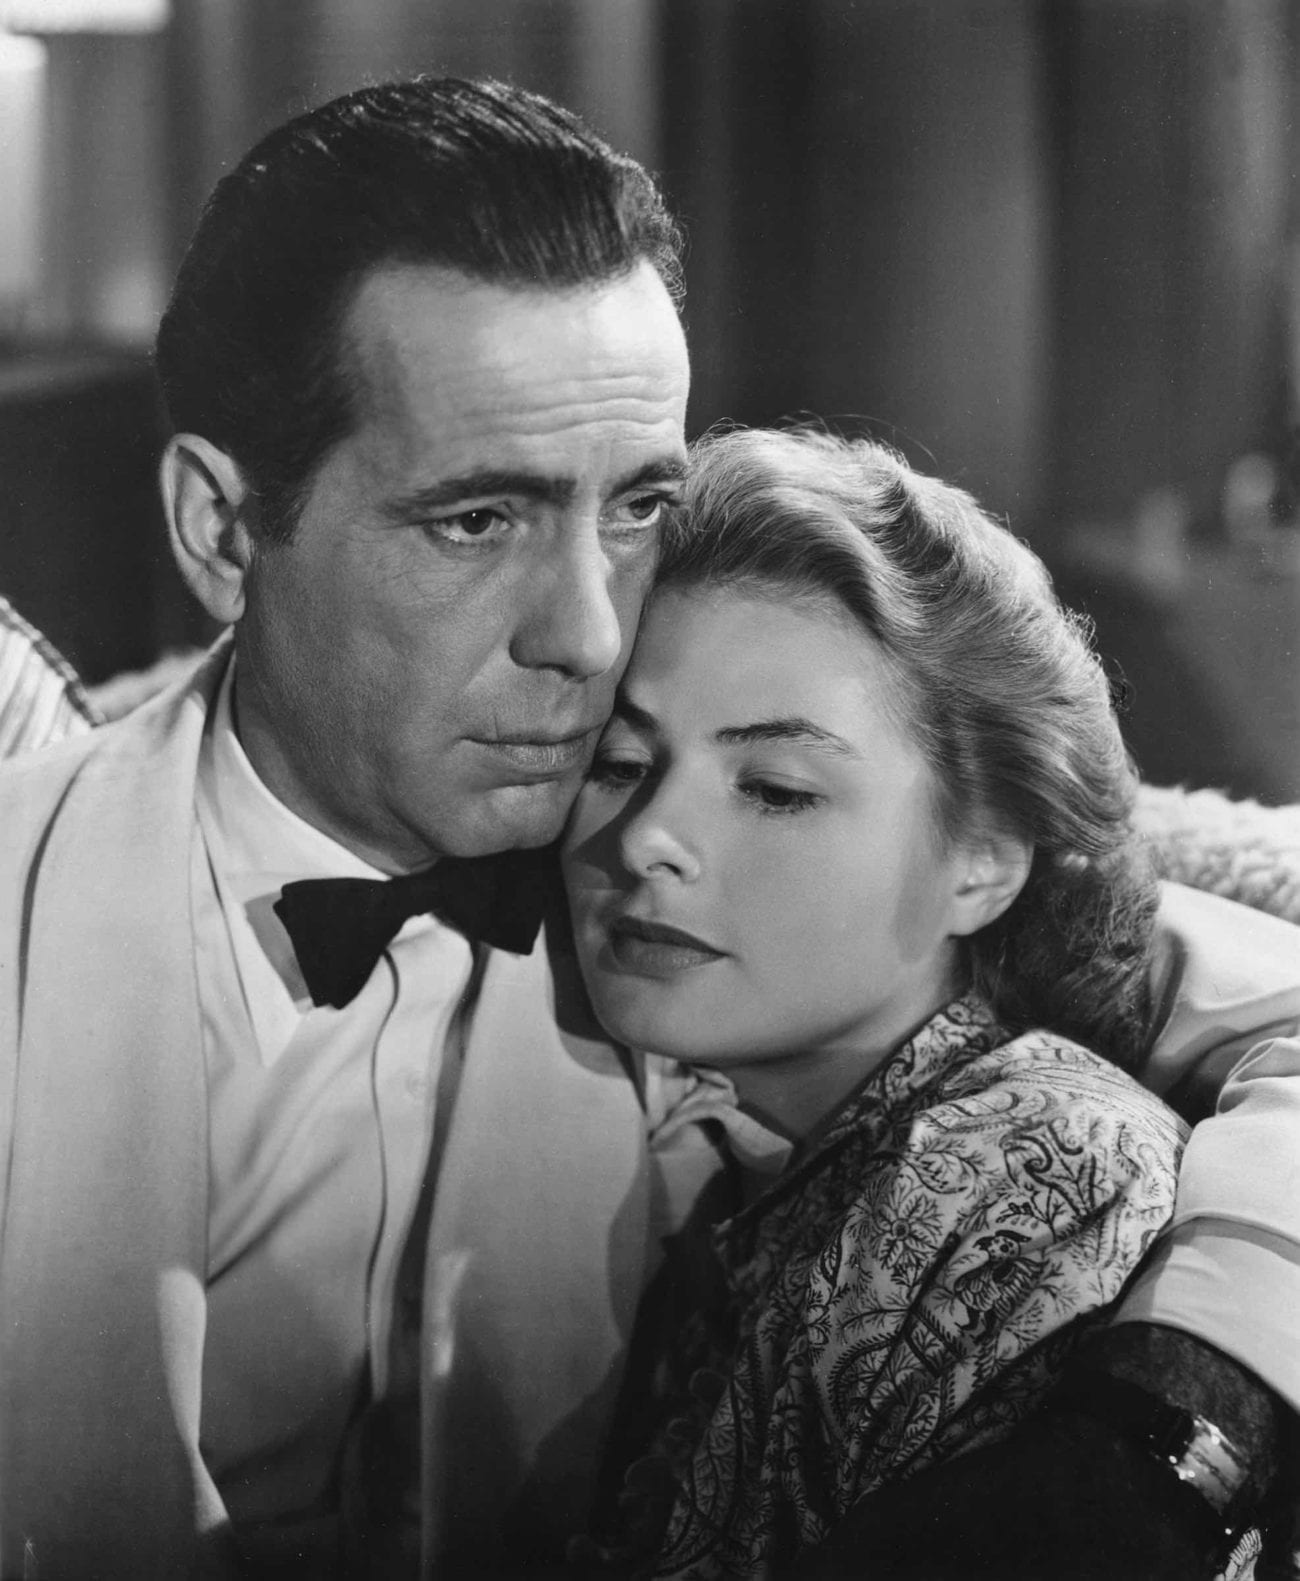 Just what is it about famous wartime movie 'Casablanca' that won our hearts – and continues to do so all these years later?